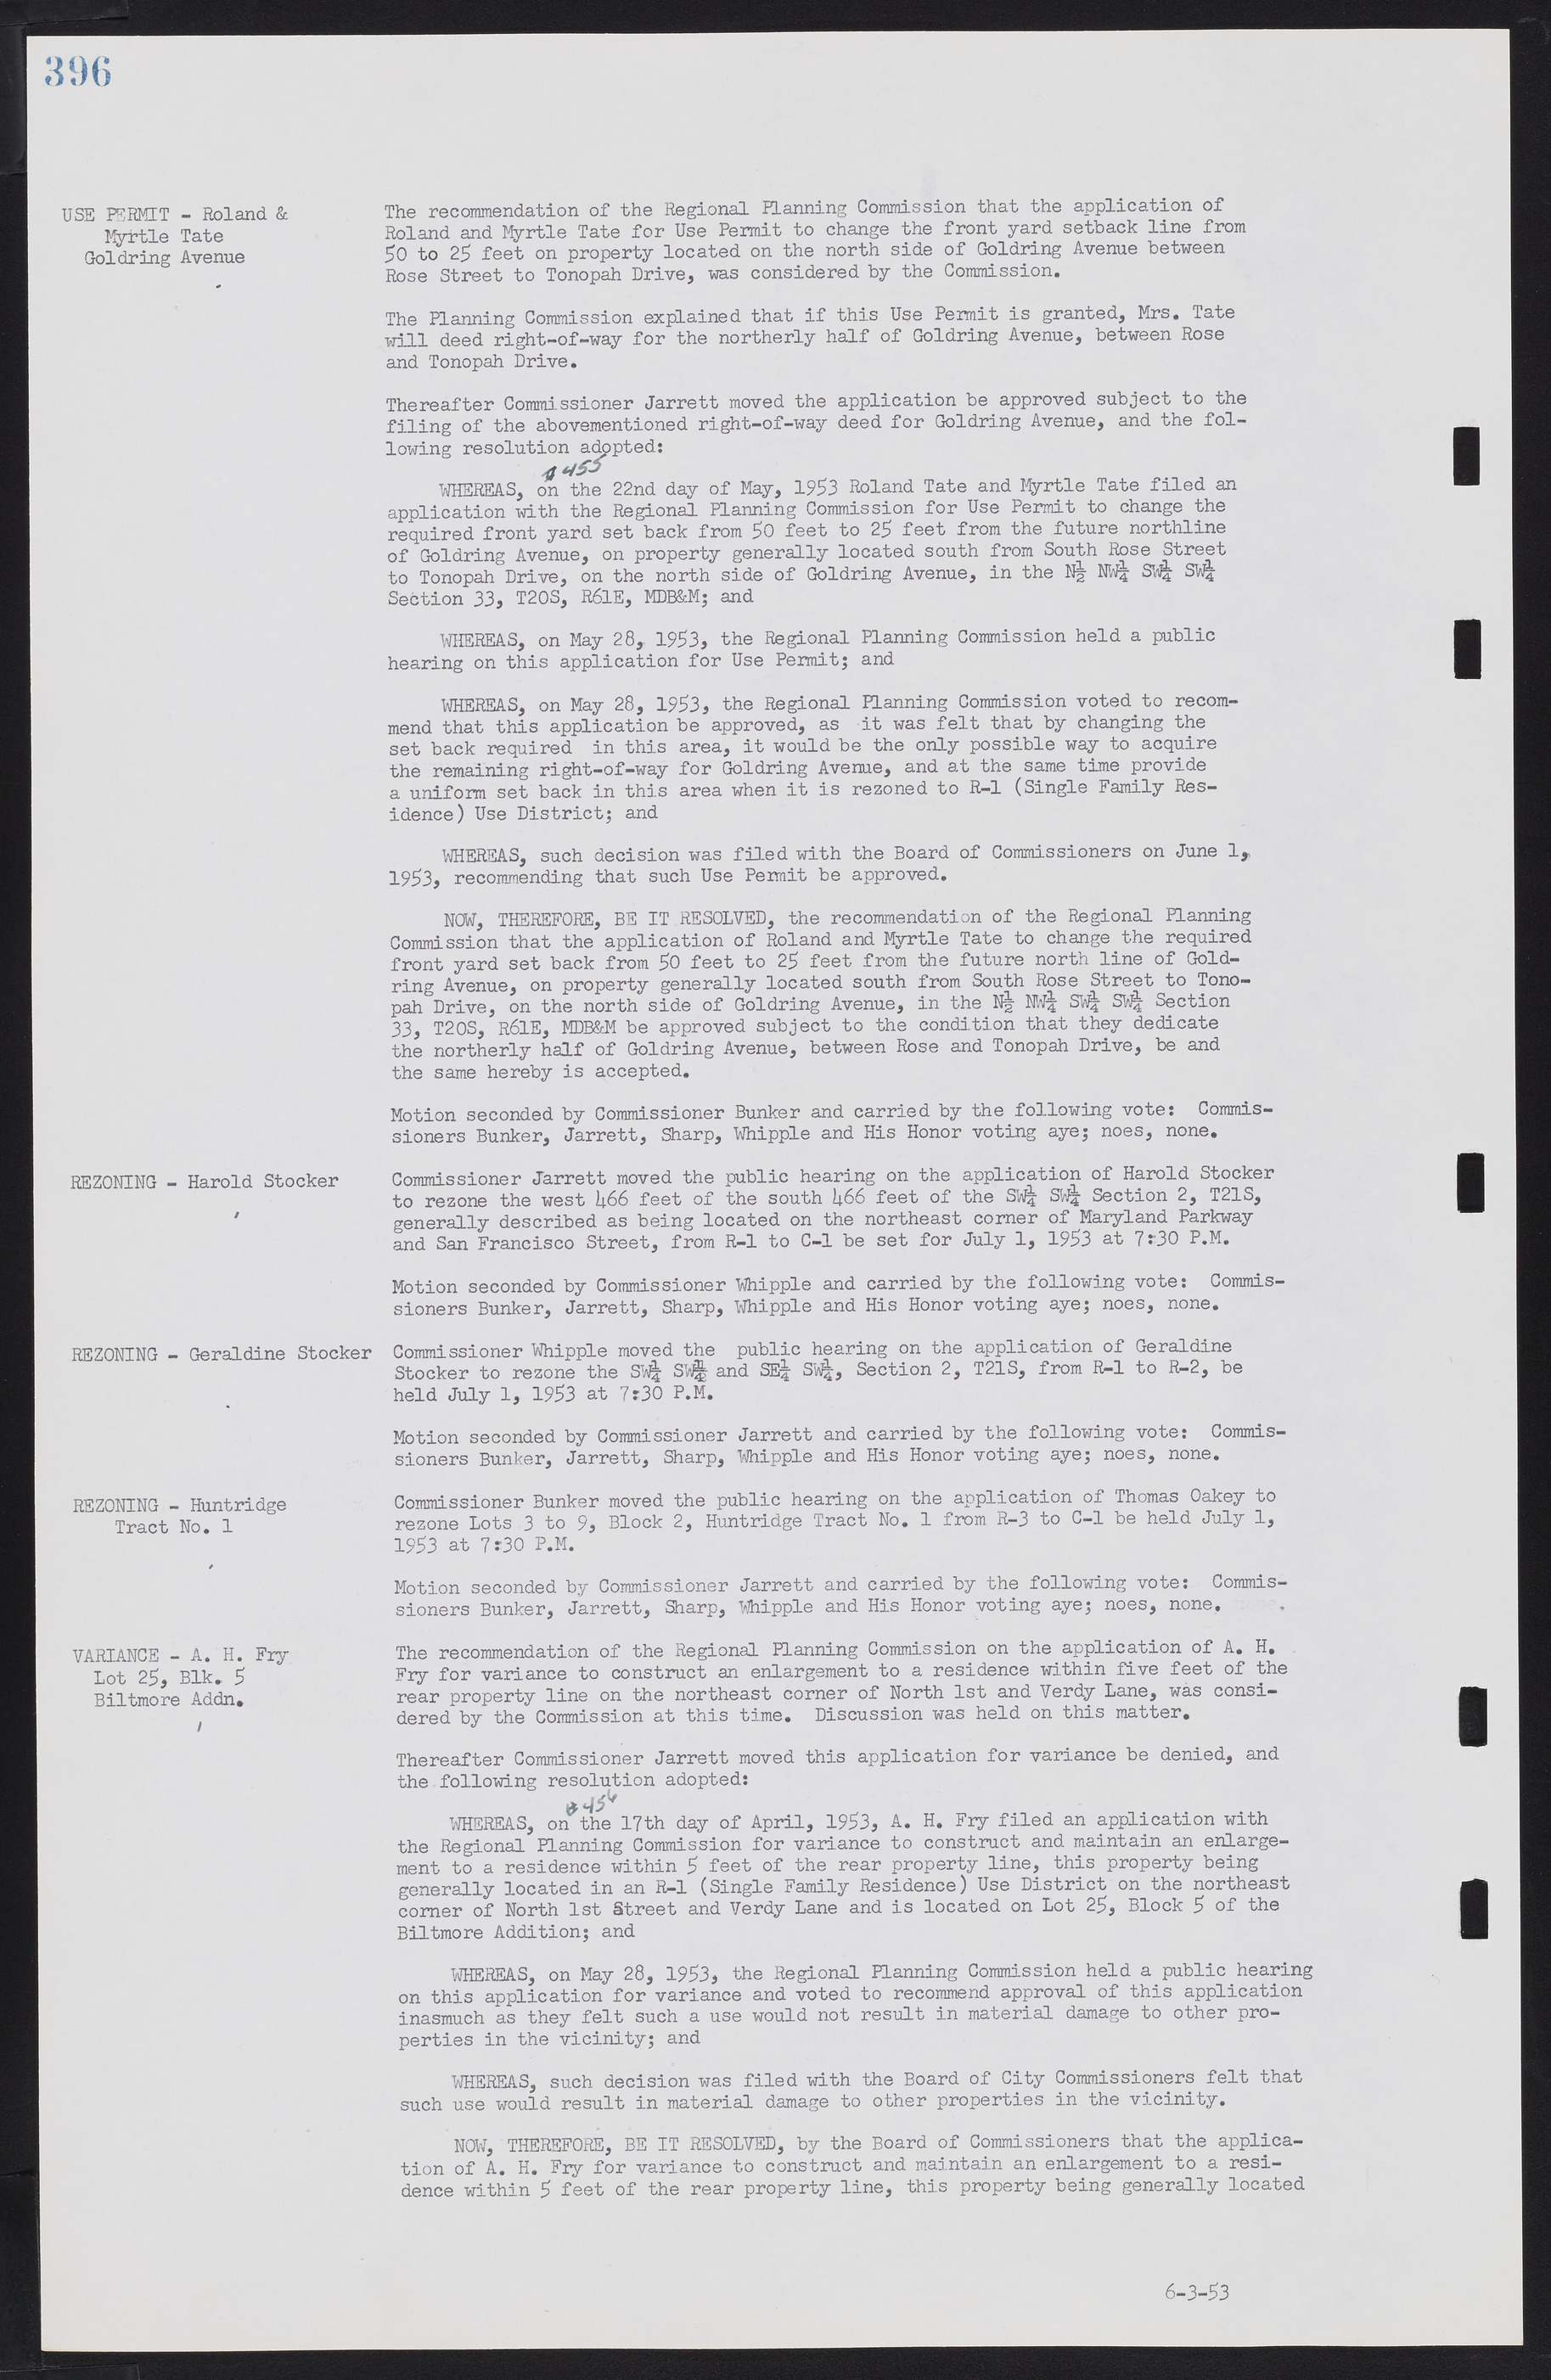 Las Vegas City Commission Minutes, May 26, 1952 to February 17, 1954, lvc000008-424